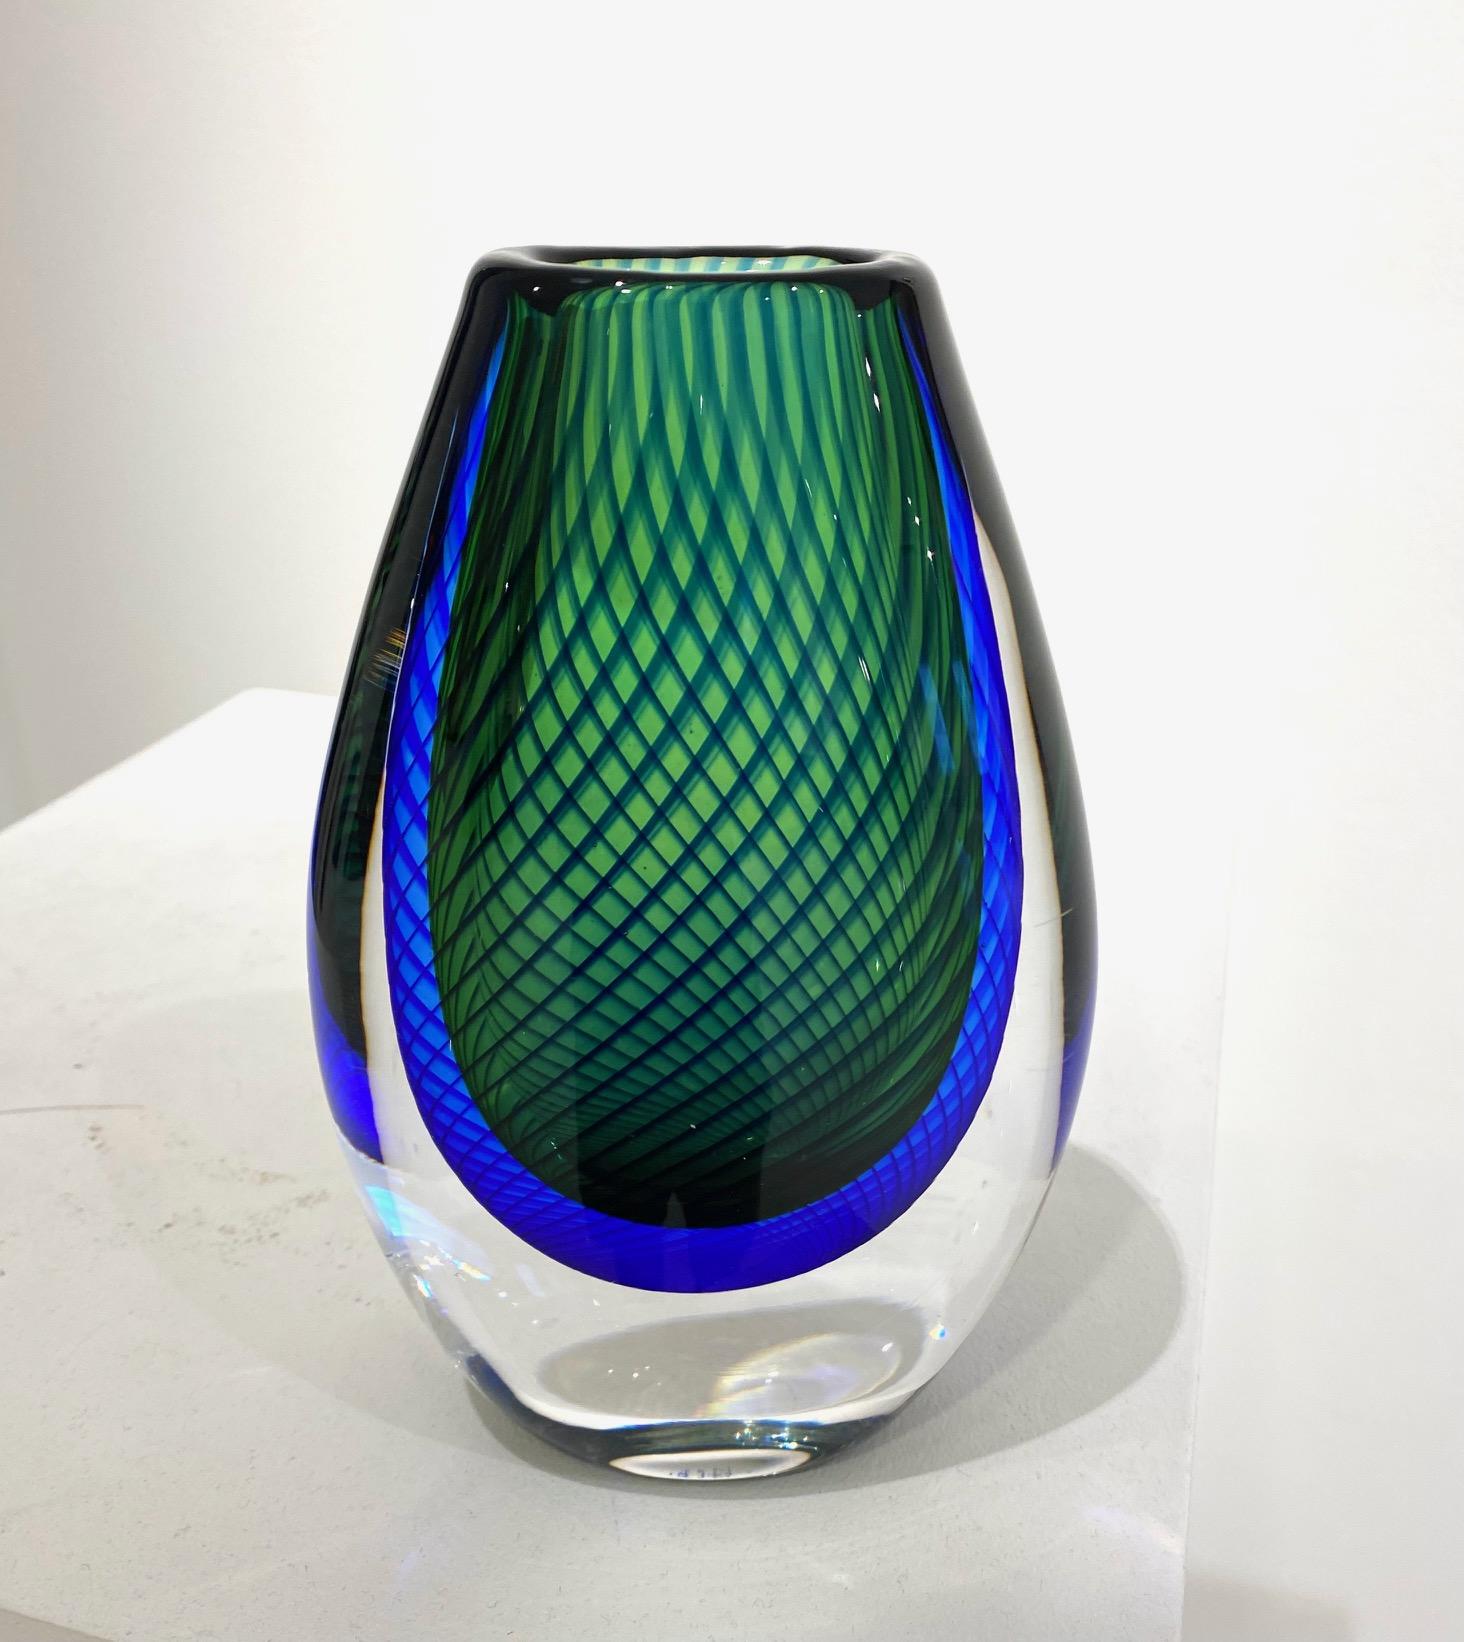 blue and green glass vase by Vicke Lindstrand for Kosta Boda Etched signature and number to underside of each example ‘Kosta 41592 V. Lindstrand’. Sweden: circa 1959 Lindstrand, who had begun his career as an illustrator before moving into glass,